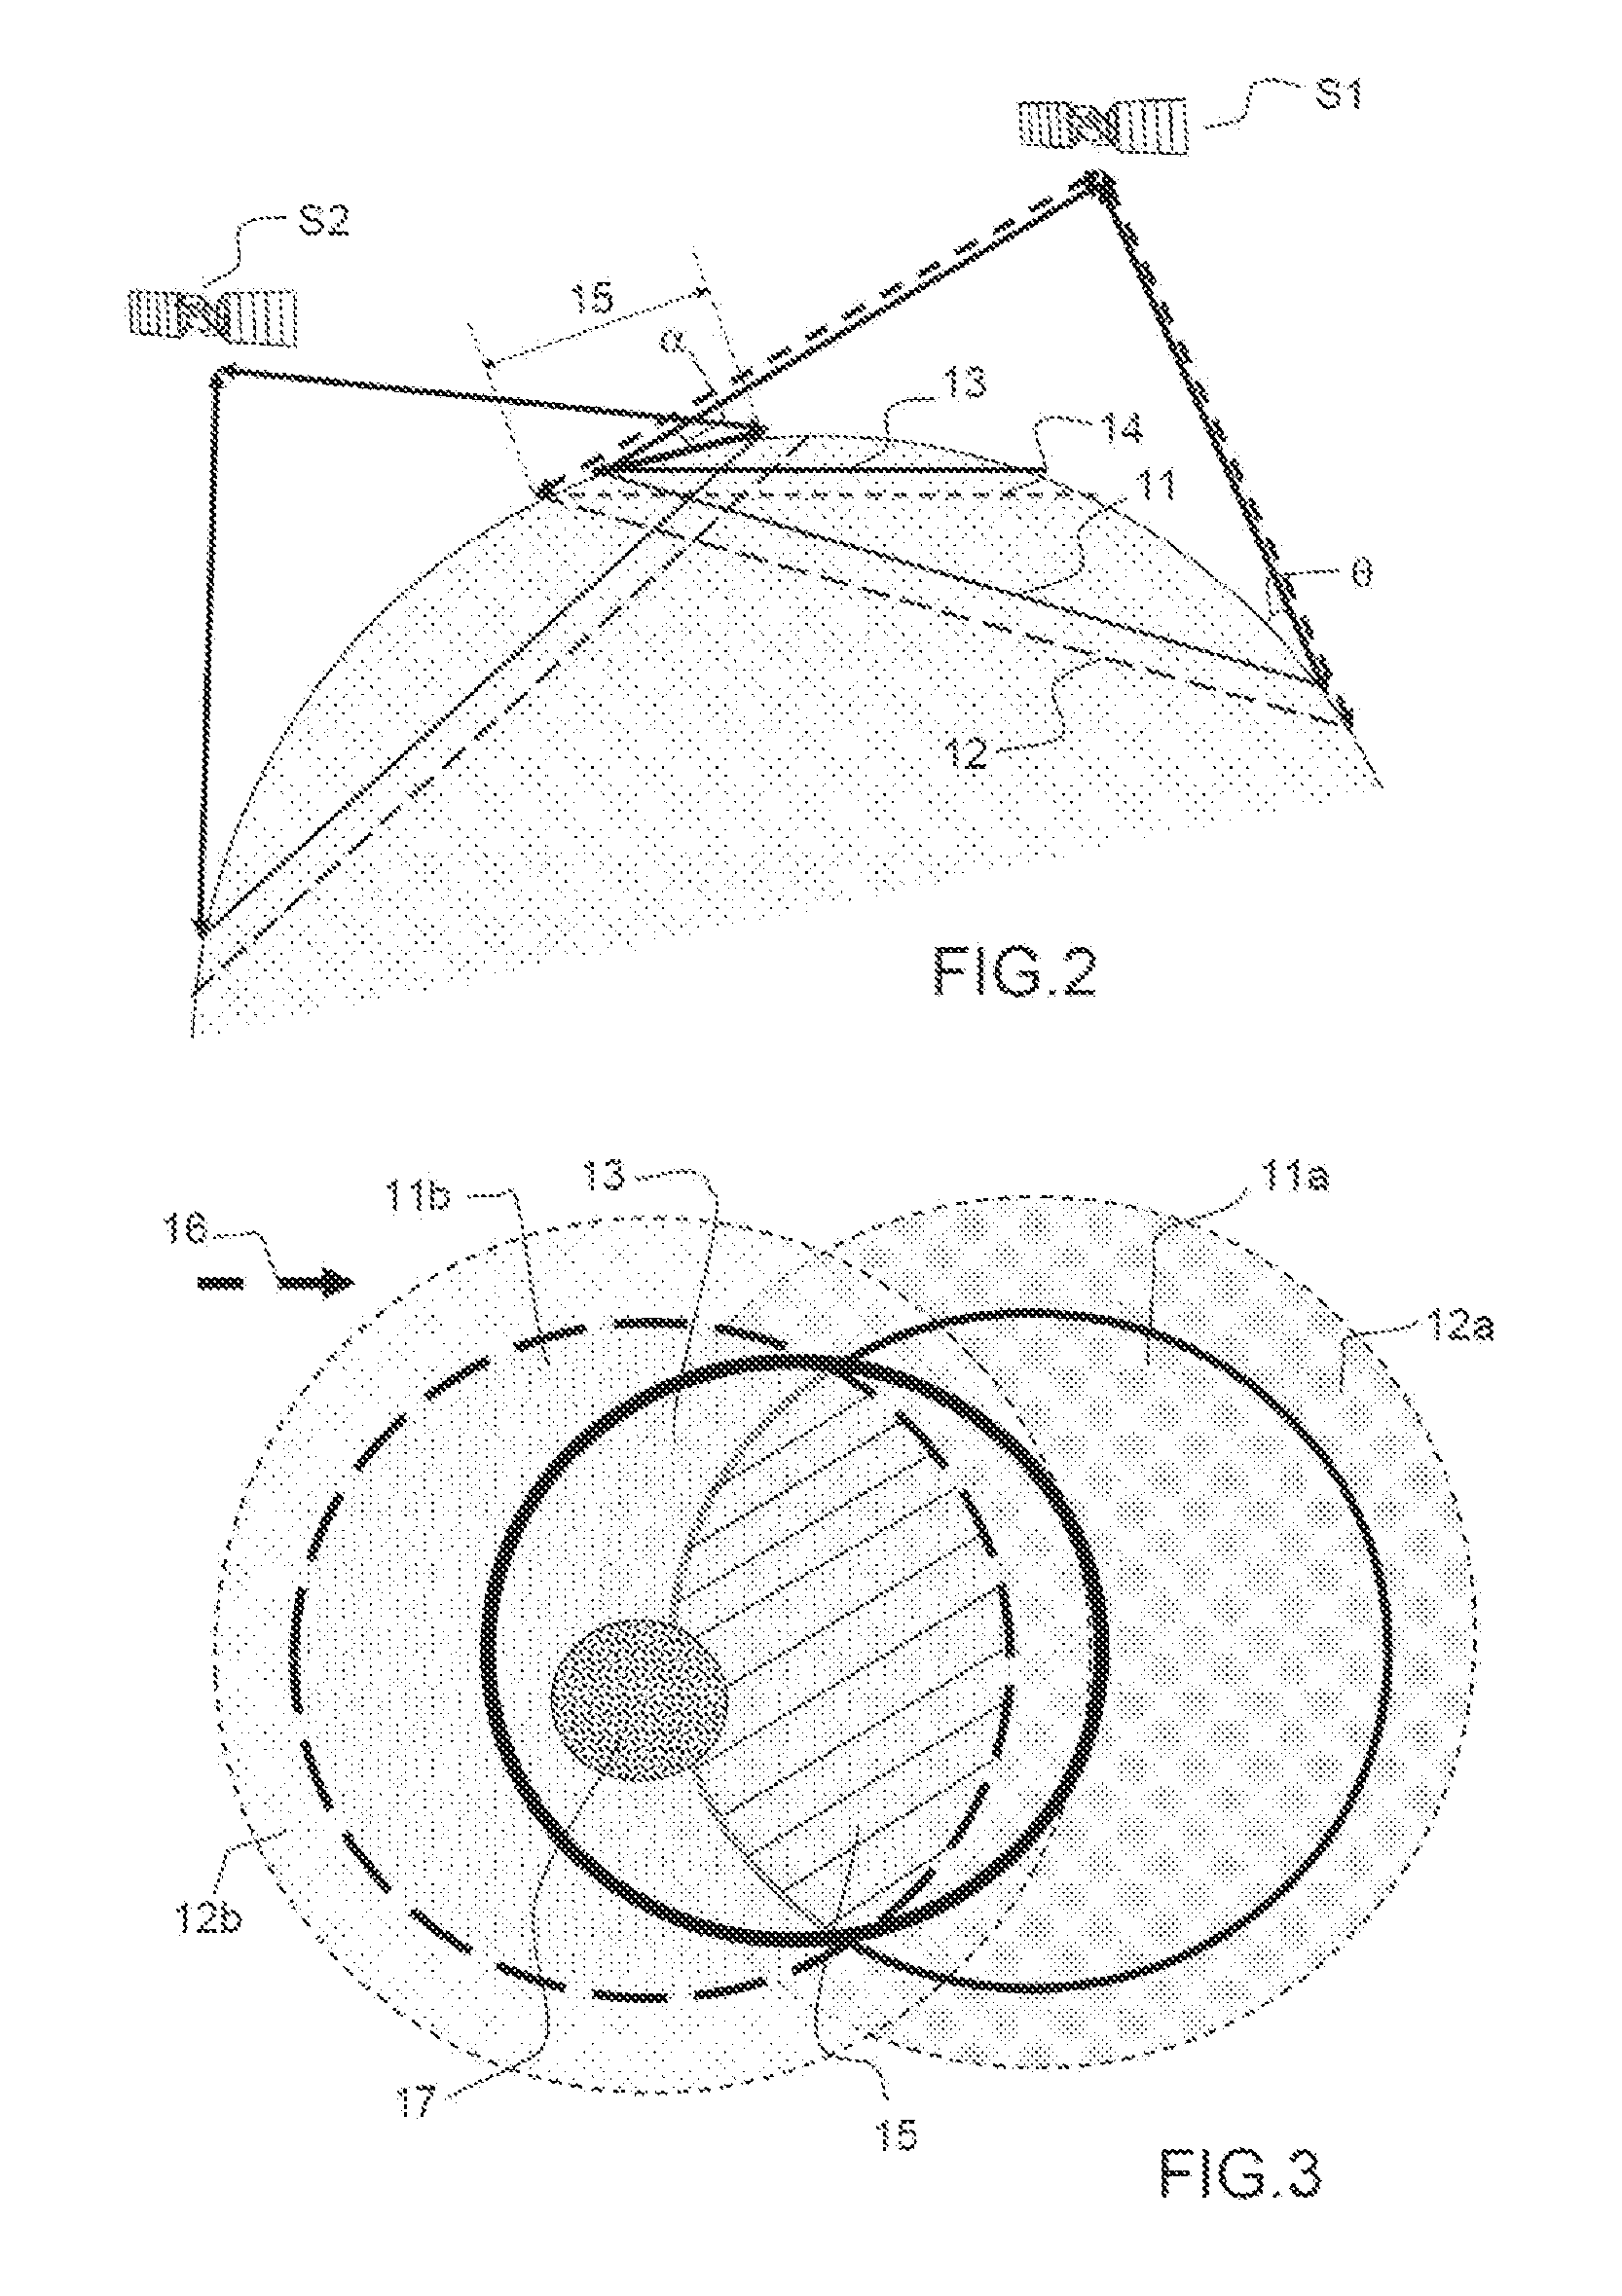 Satellite communication system for a continuous high-bitrate access service over a coverage area including at least one polar region